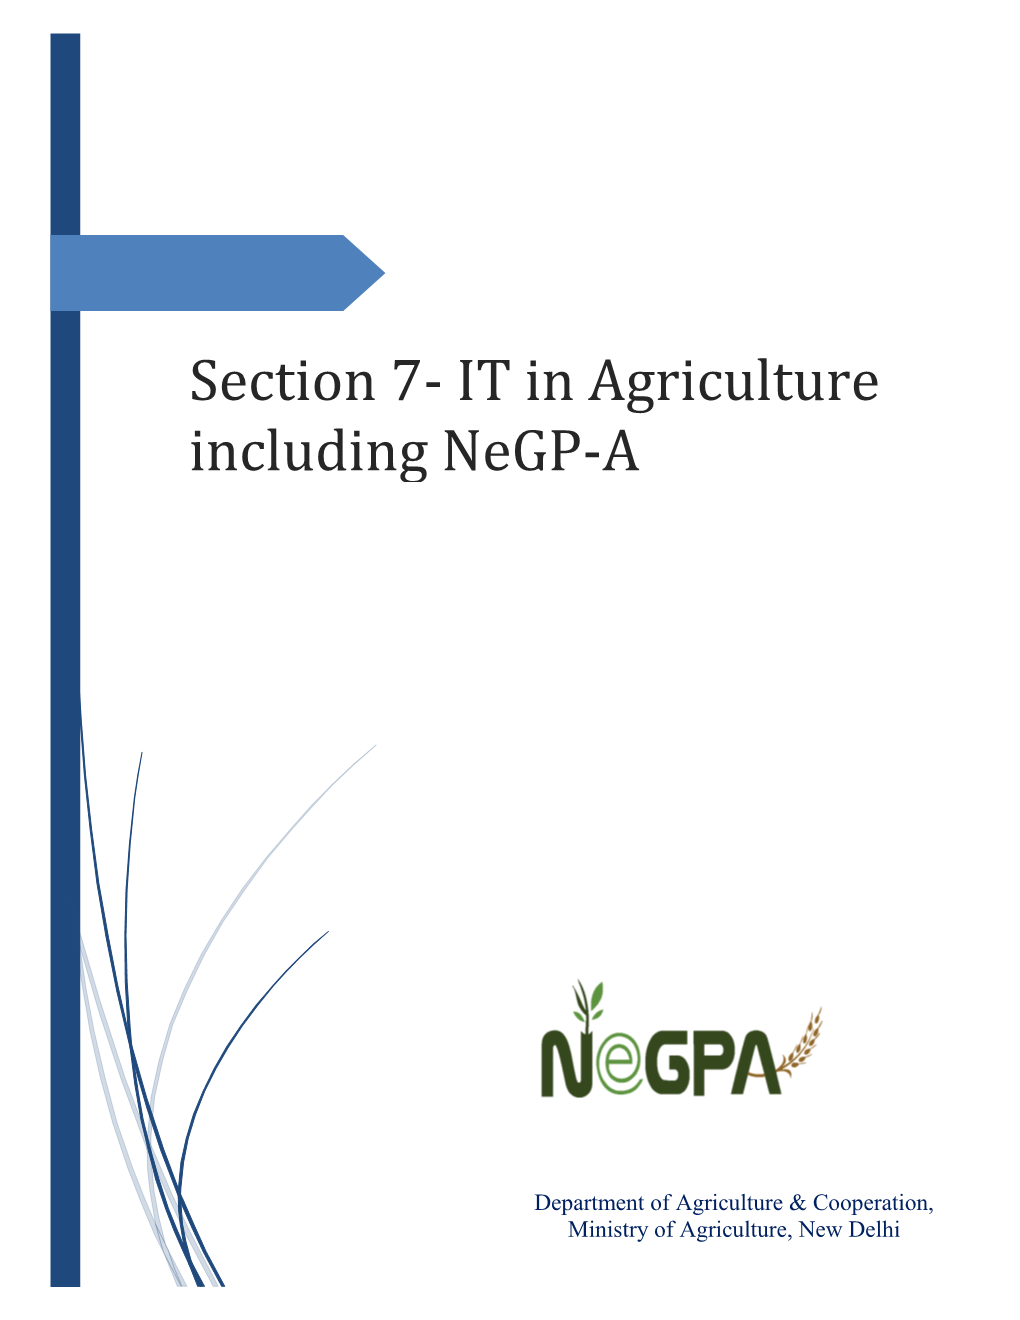 Section 7- Negp-A